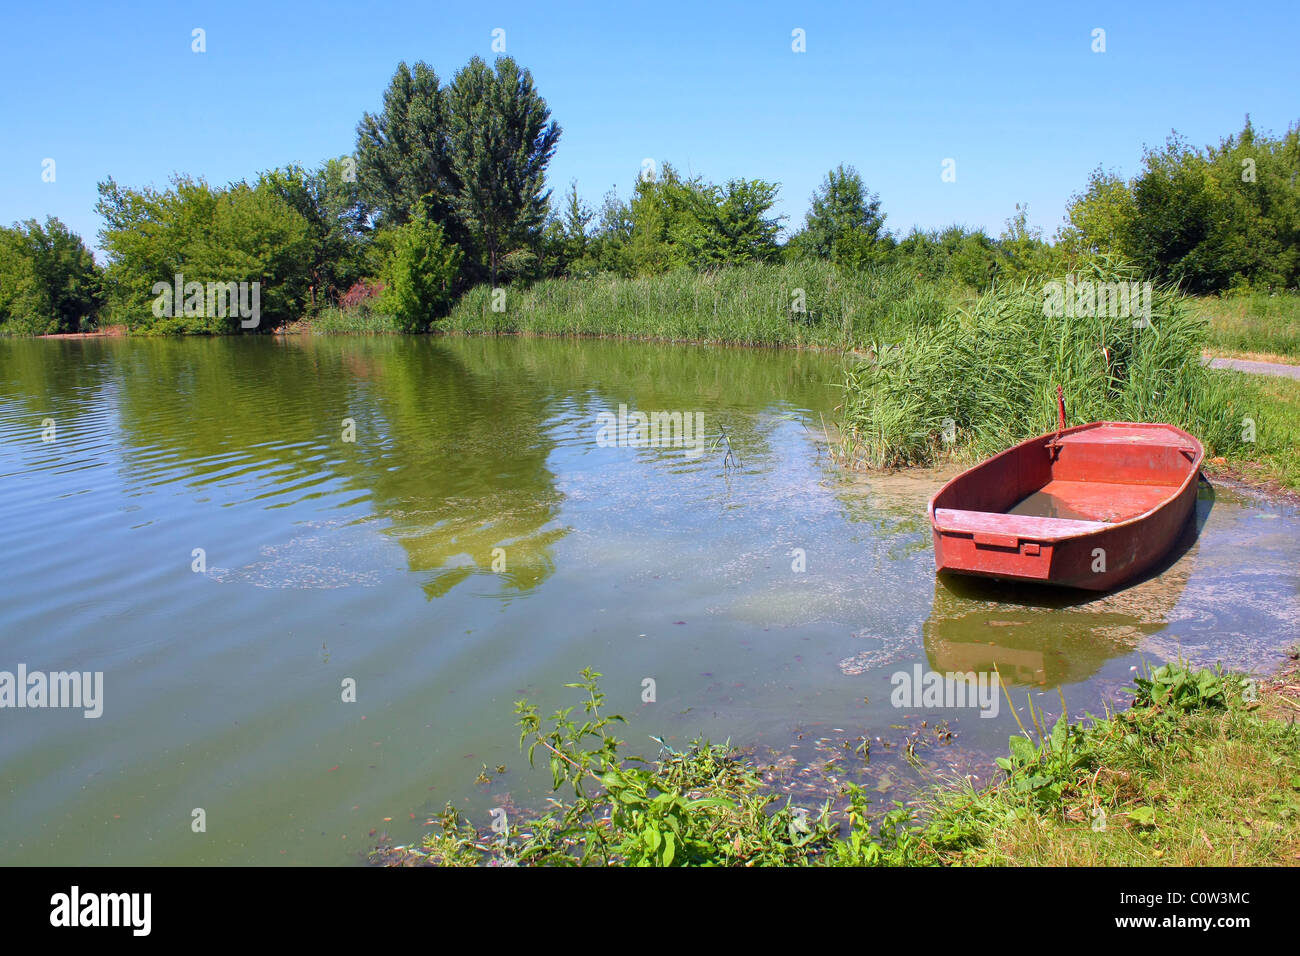 fishpond with red boat Stock Photo